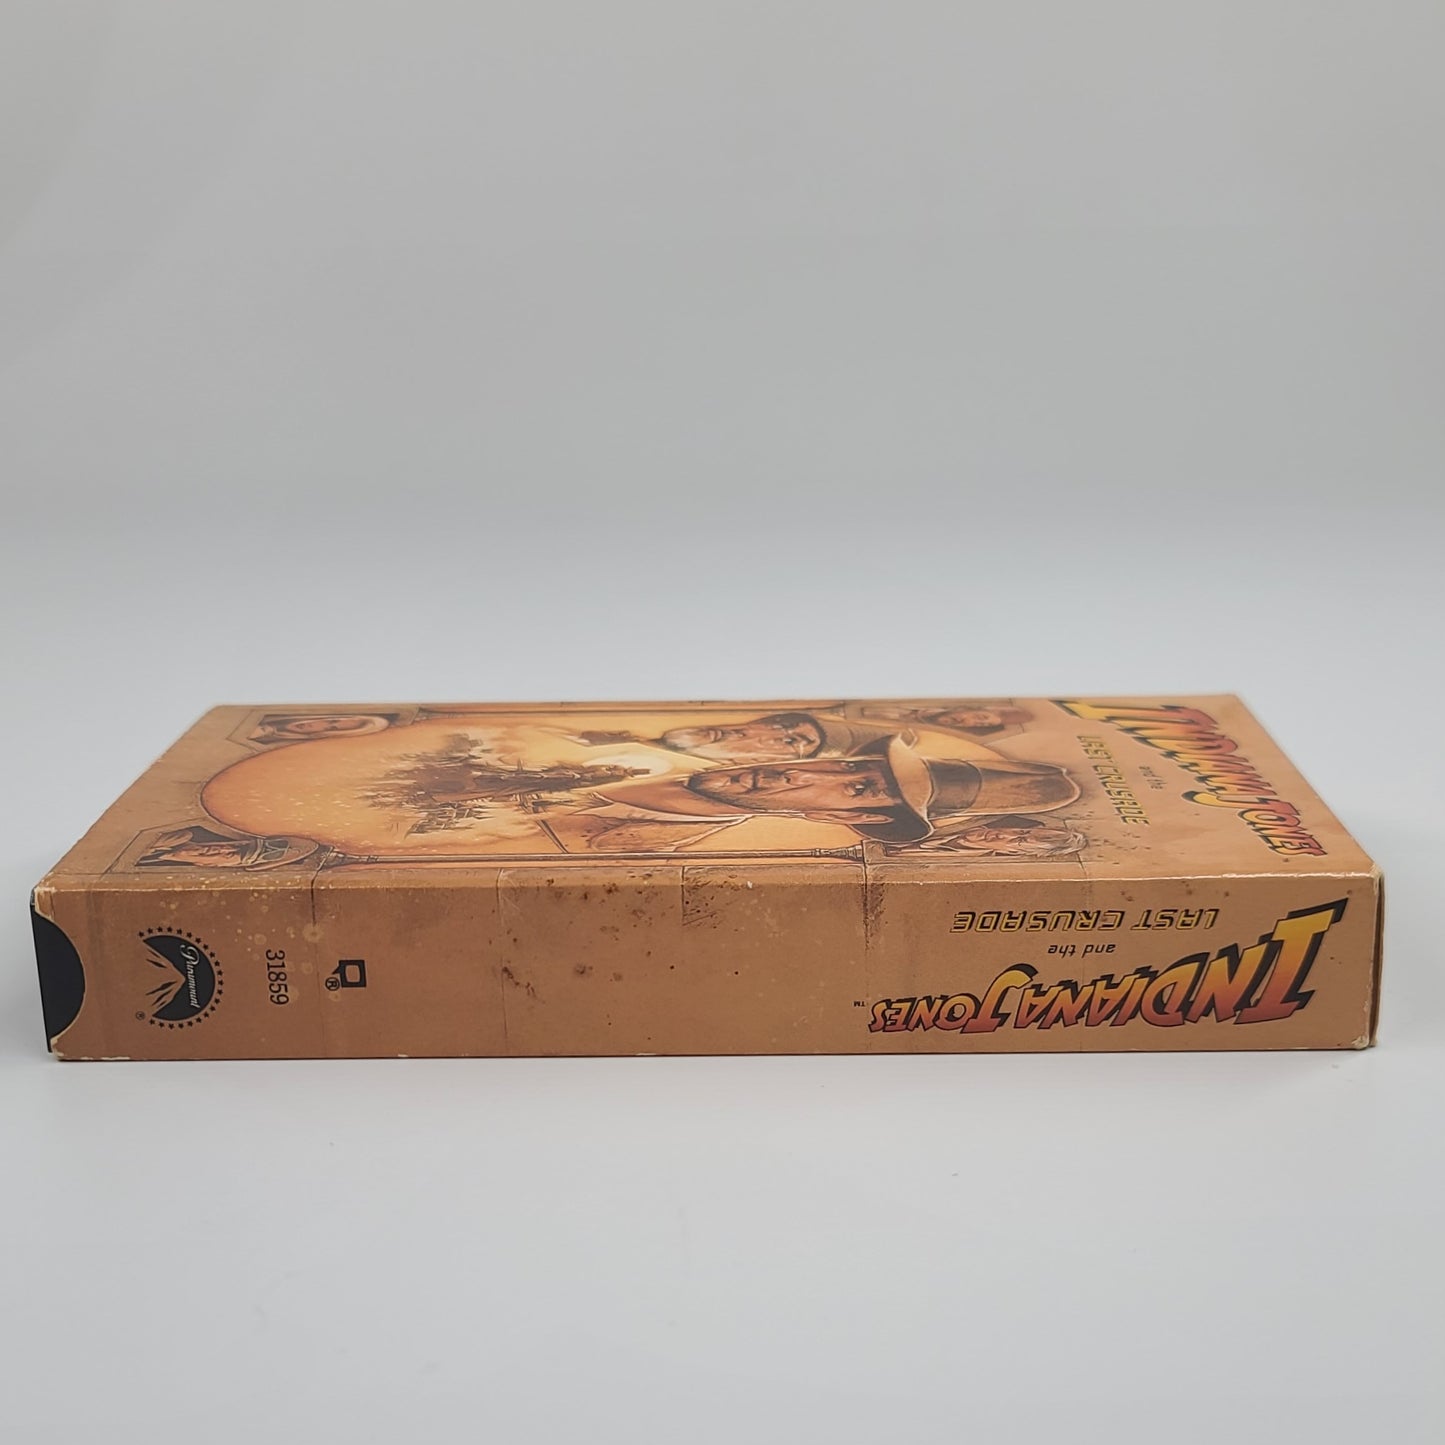 'Indiana Jones And The Last Crusade' VHS